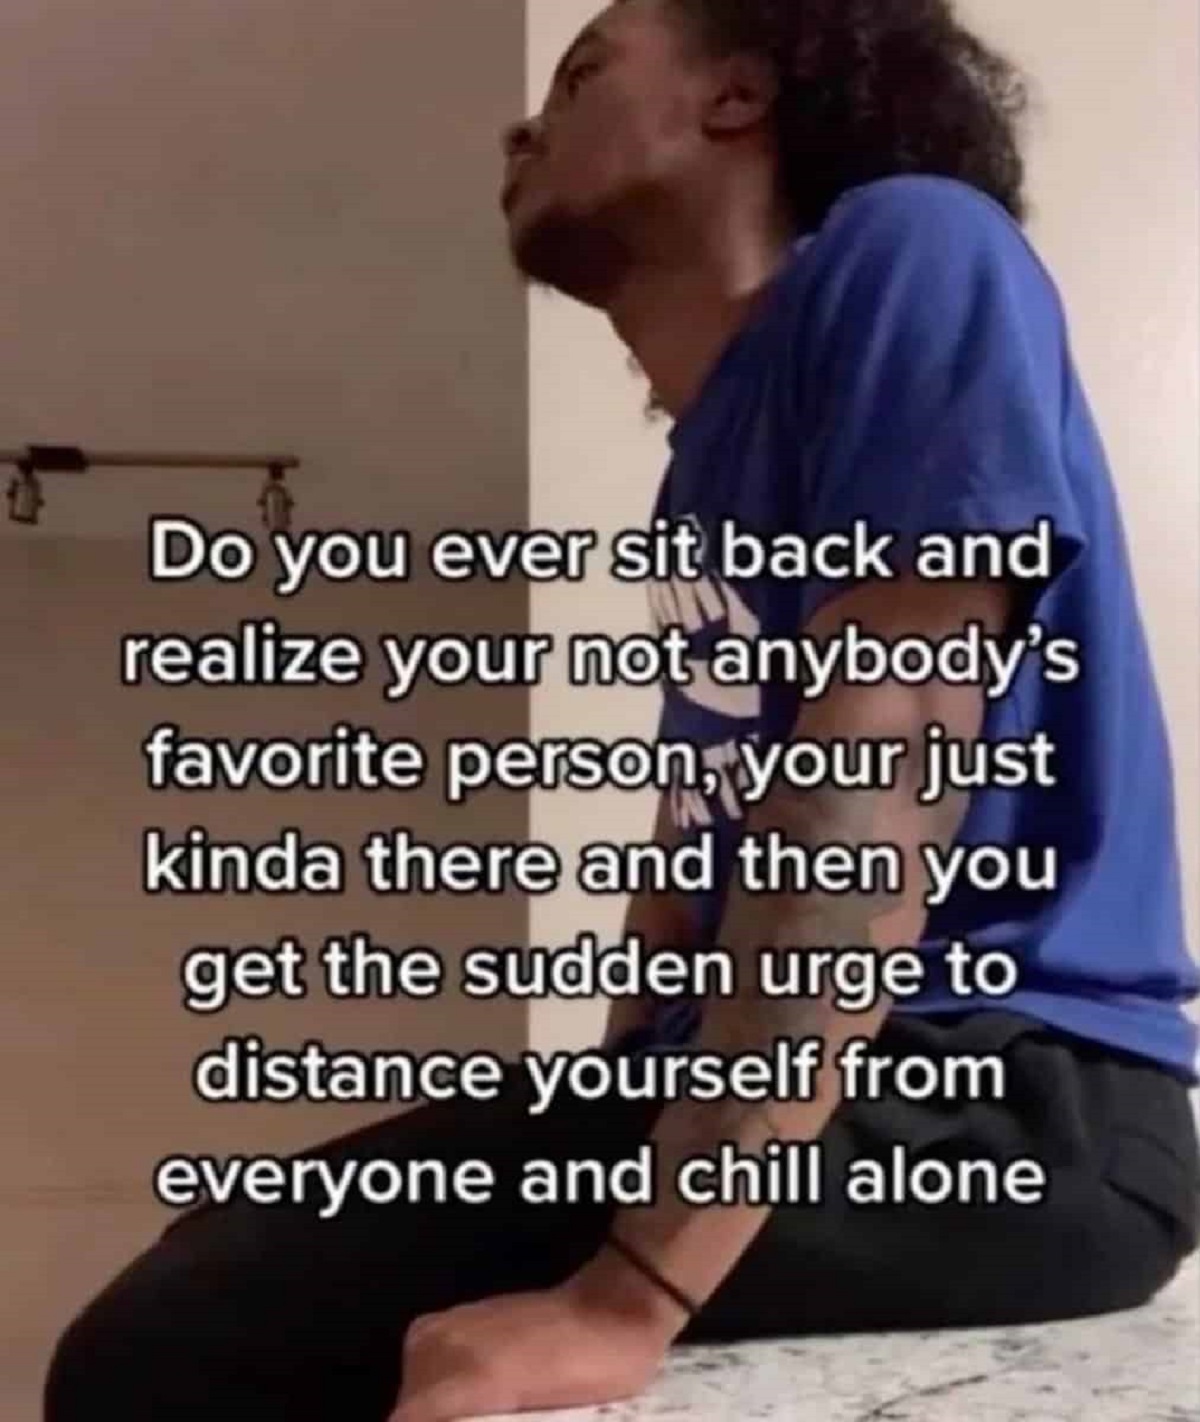 Meme - Do you ever sit back and realize your not anybody's favorite person, your just kinda there and then you get the sudden urge to distance yourself from everyone and chill alone